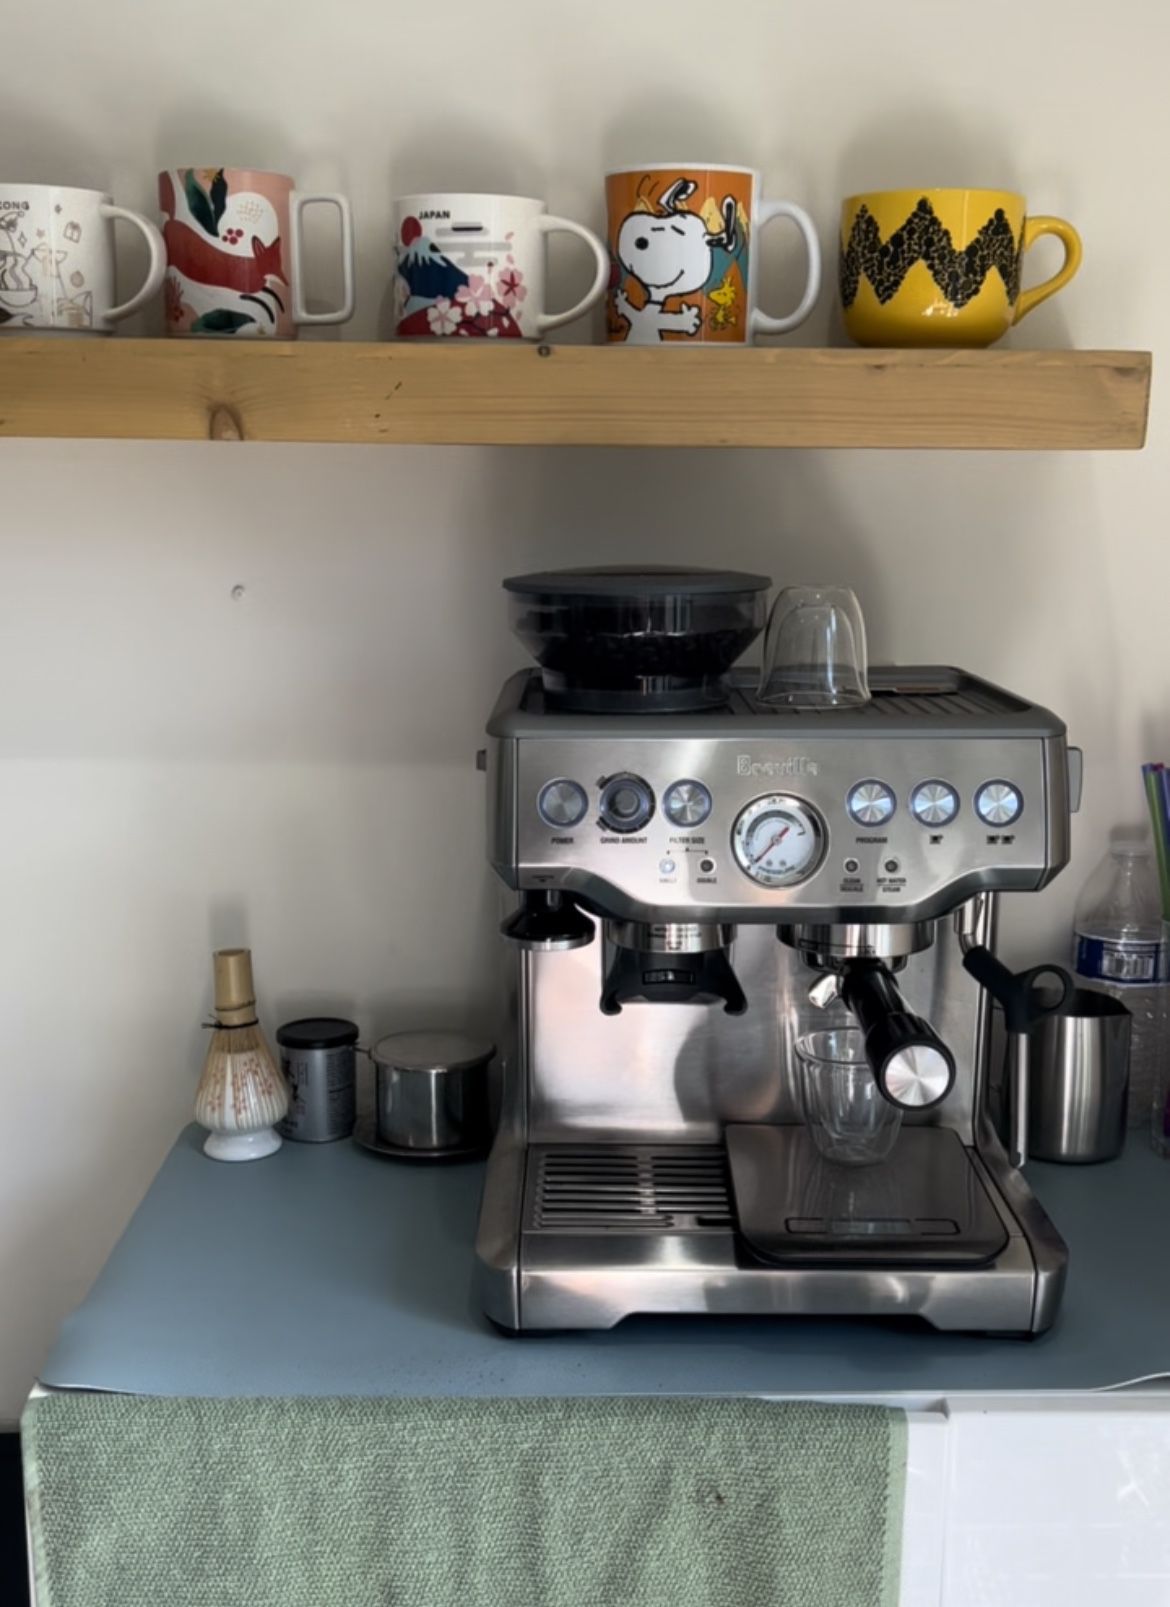 BREVILLE The Grind Control Coffee Maker for Sale in Croton-on-hudson, NY -  OfferUp